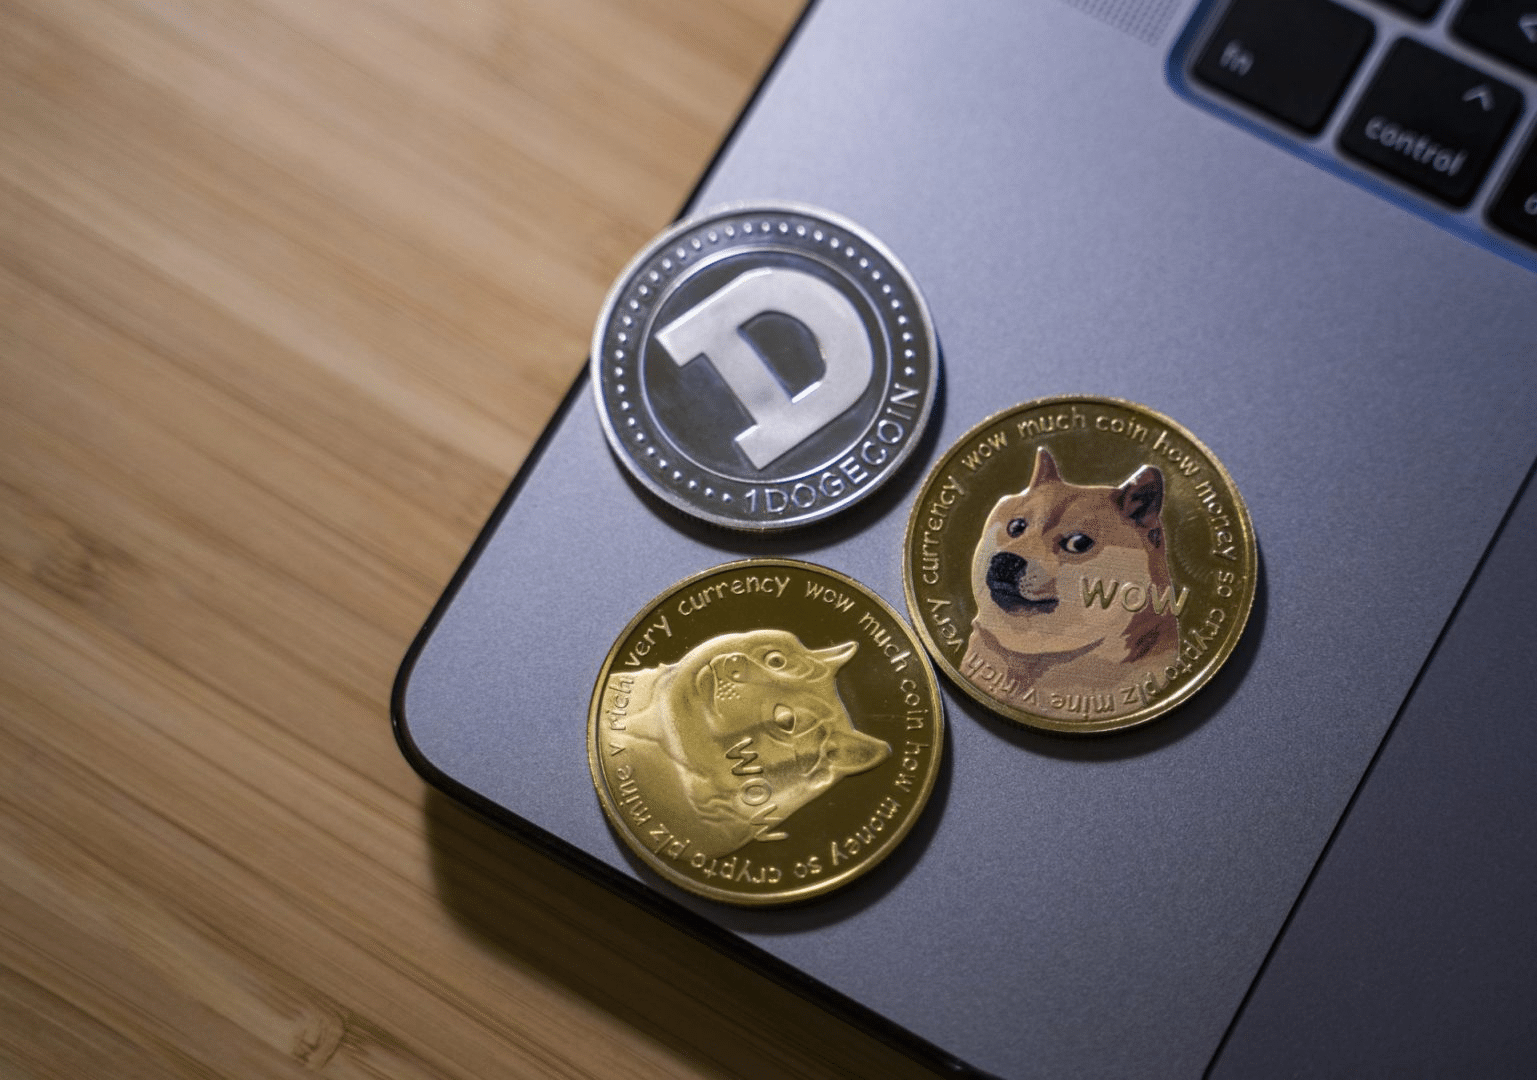 Dogecoin (DOGE) Price Prediction 2024, Will Retik Finance (RETIK) Give 10X  More Profits? Yes Feel Experts